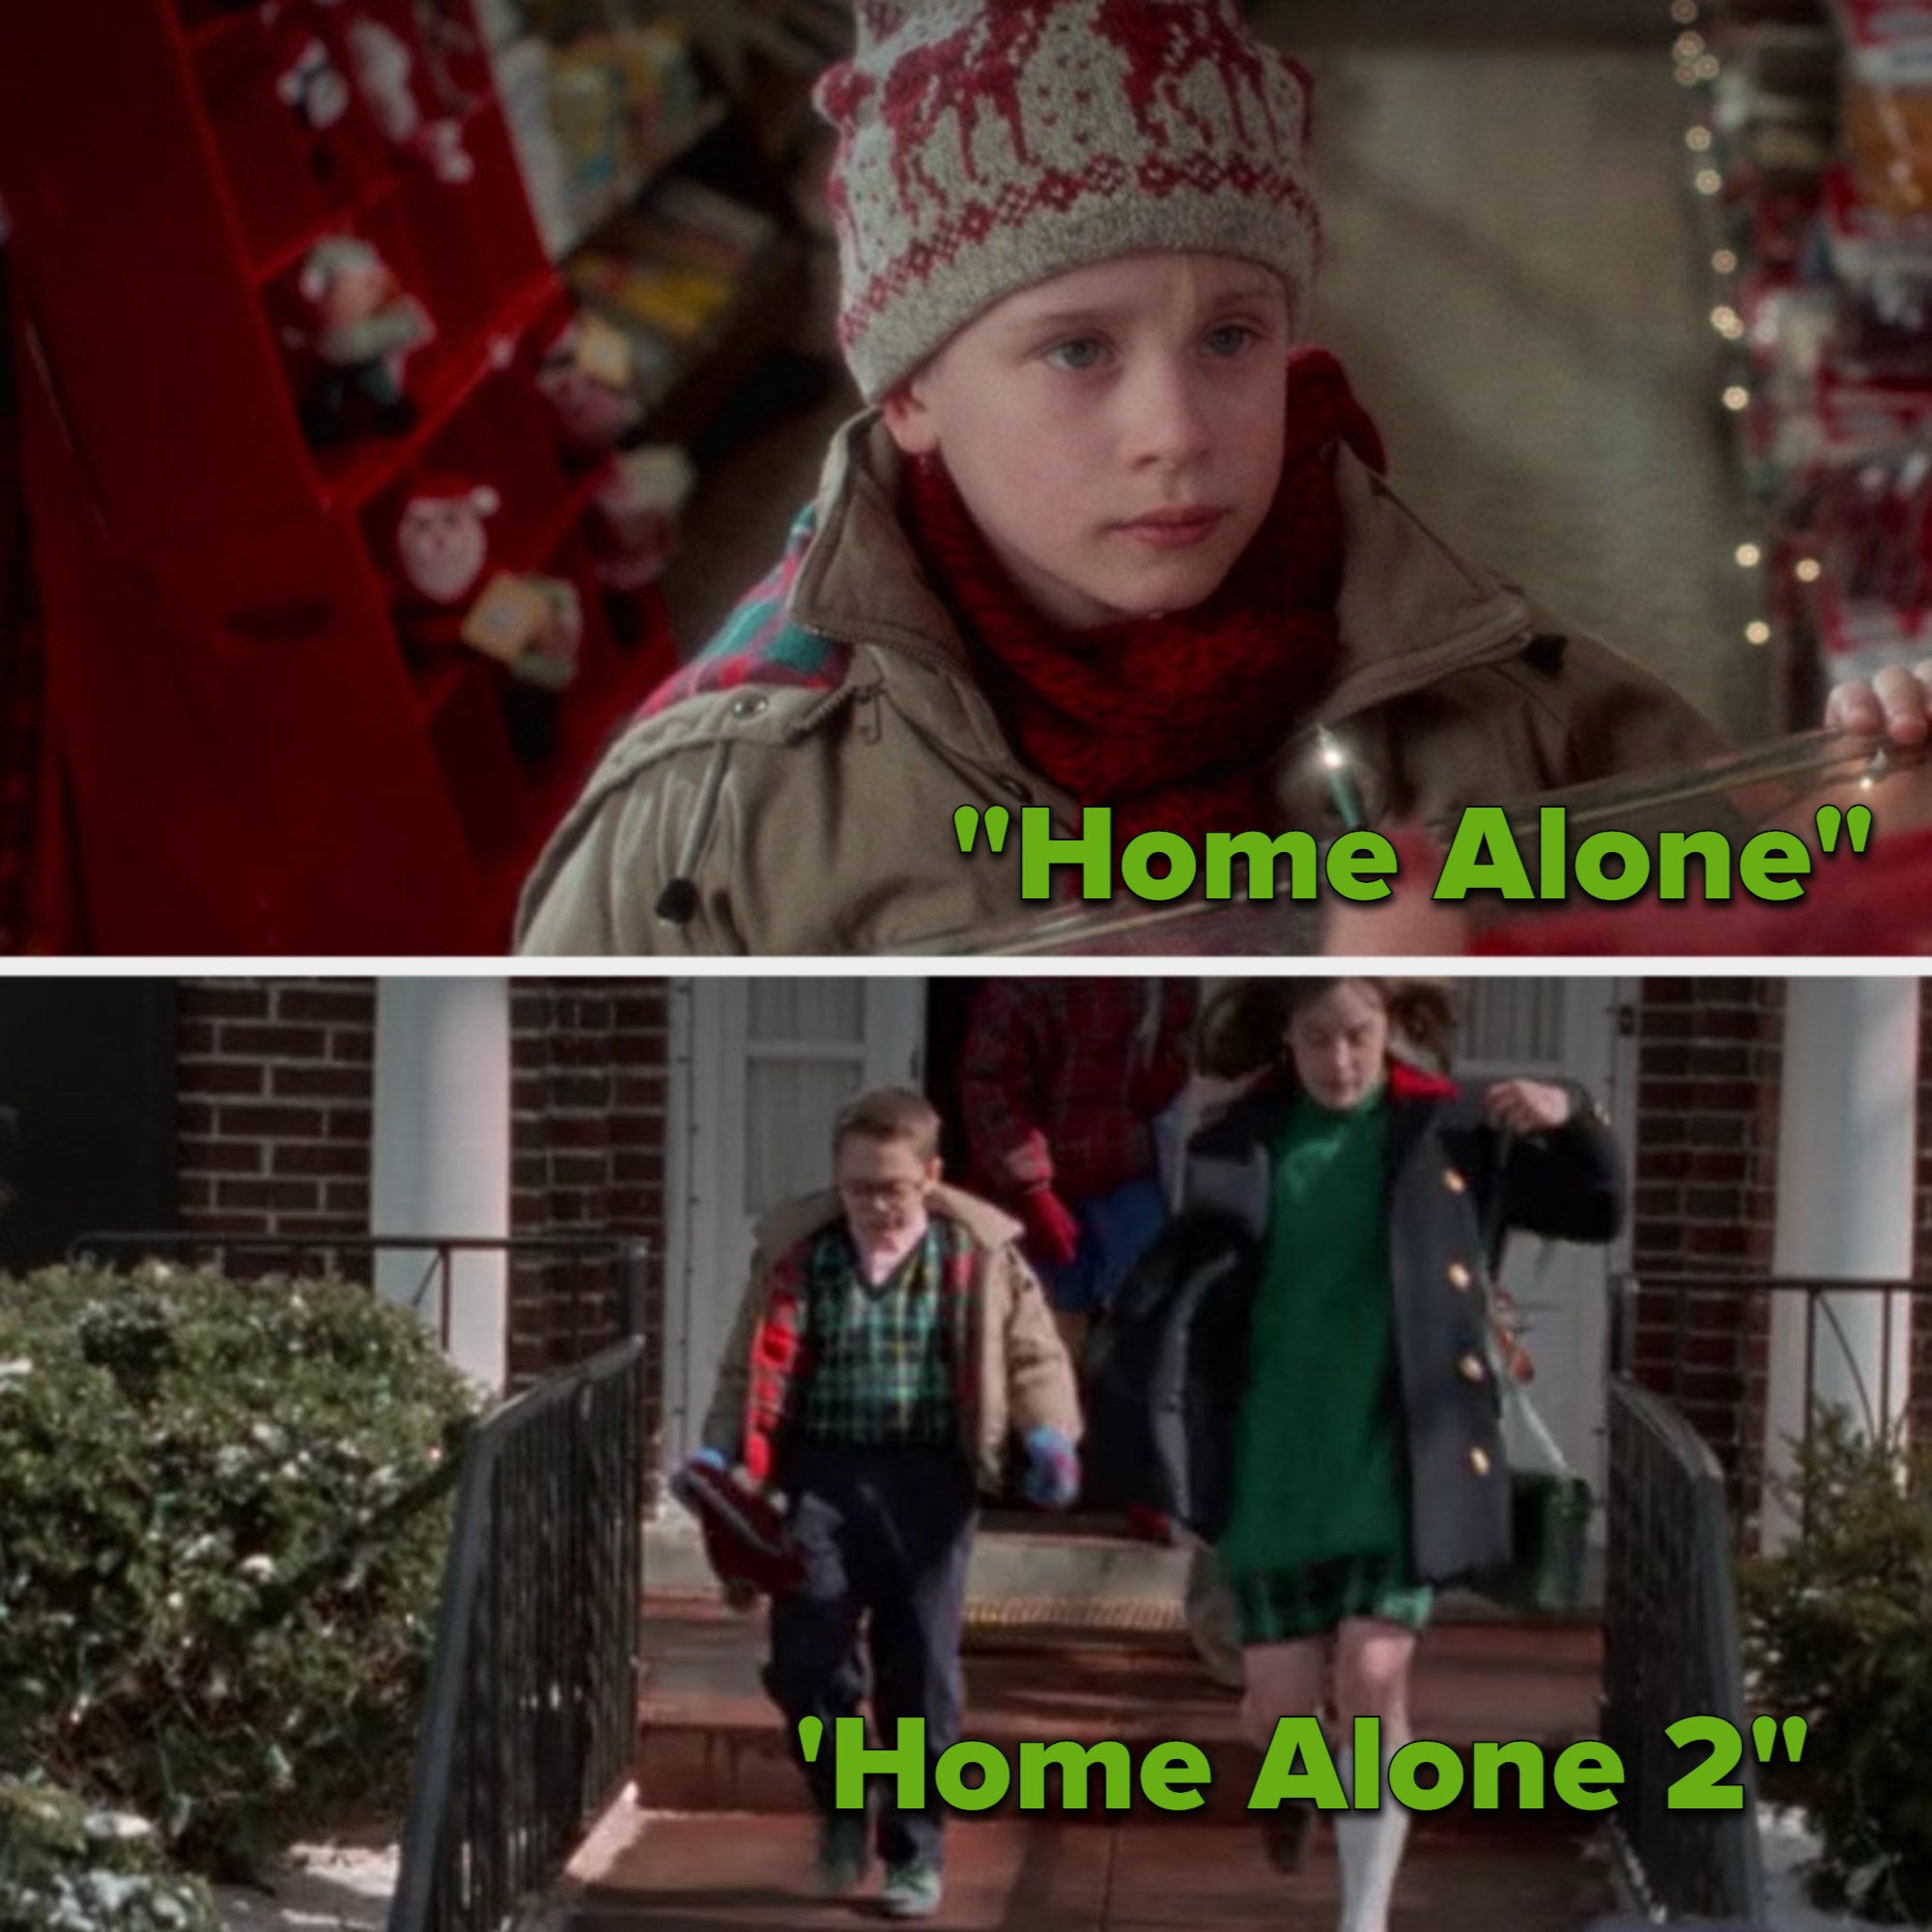 Kevin wearing a jacket in &quot;Home Alone&quot; and Fuller wearing the same jacket in &quot;Home Alone 2&quot;